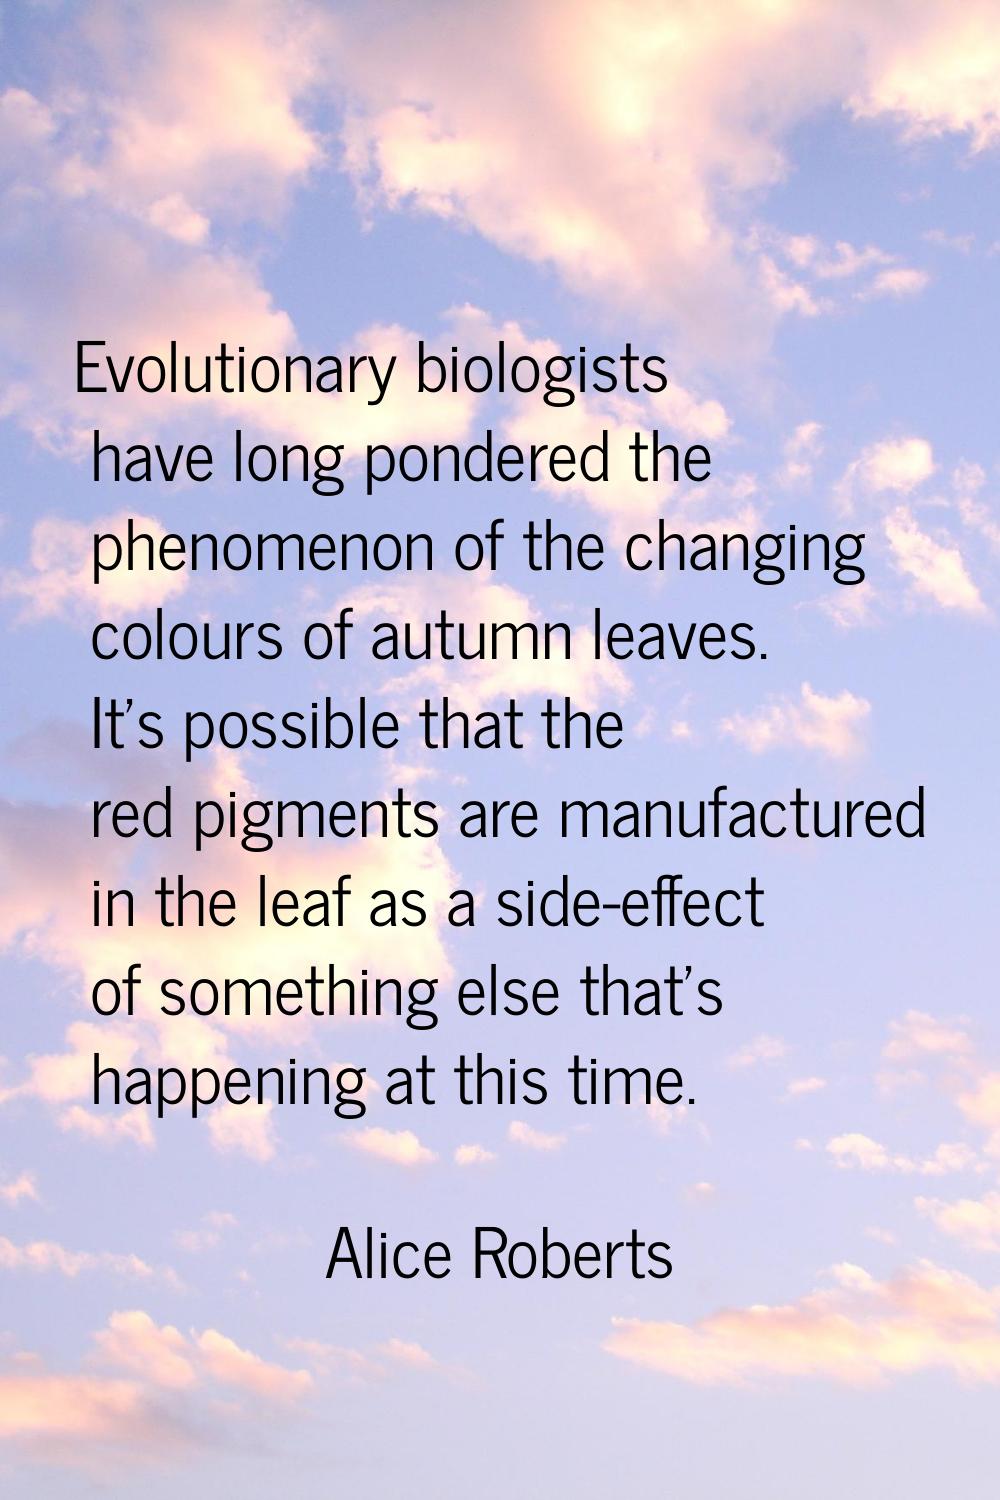 Evolutionary biologists have long pondered the phenomenon of the changing colours of autumn leaves.